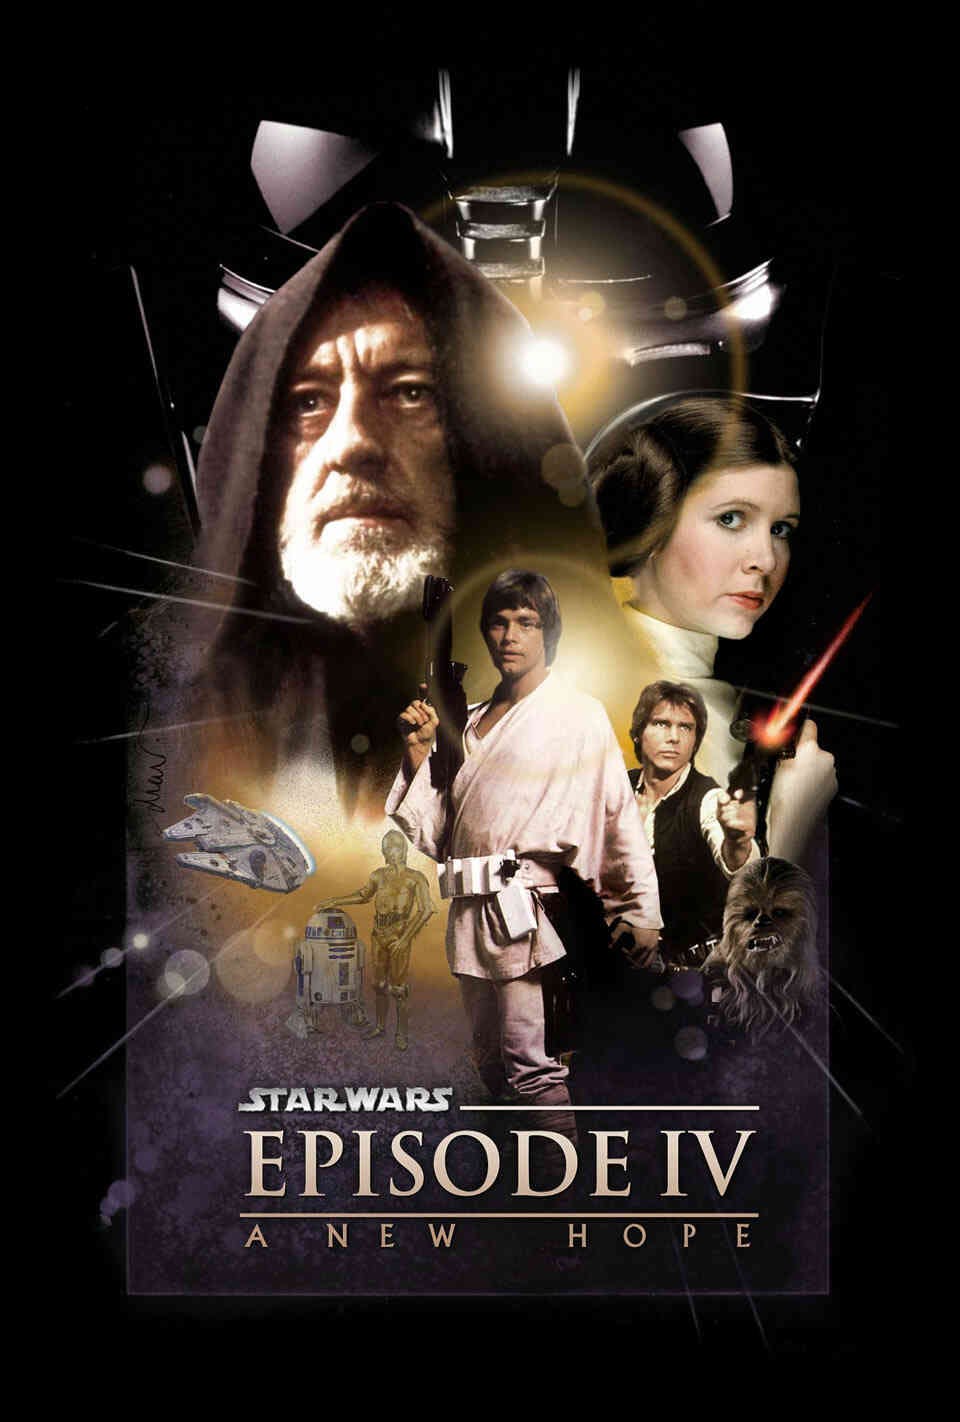 Read Episode IV - A New Hope screenplay (poster)